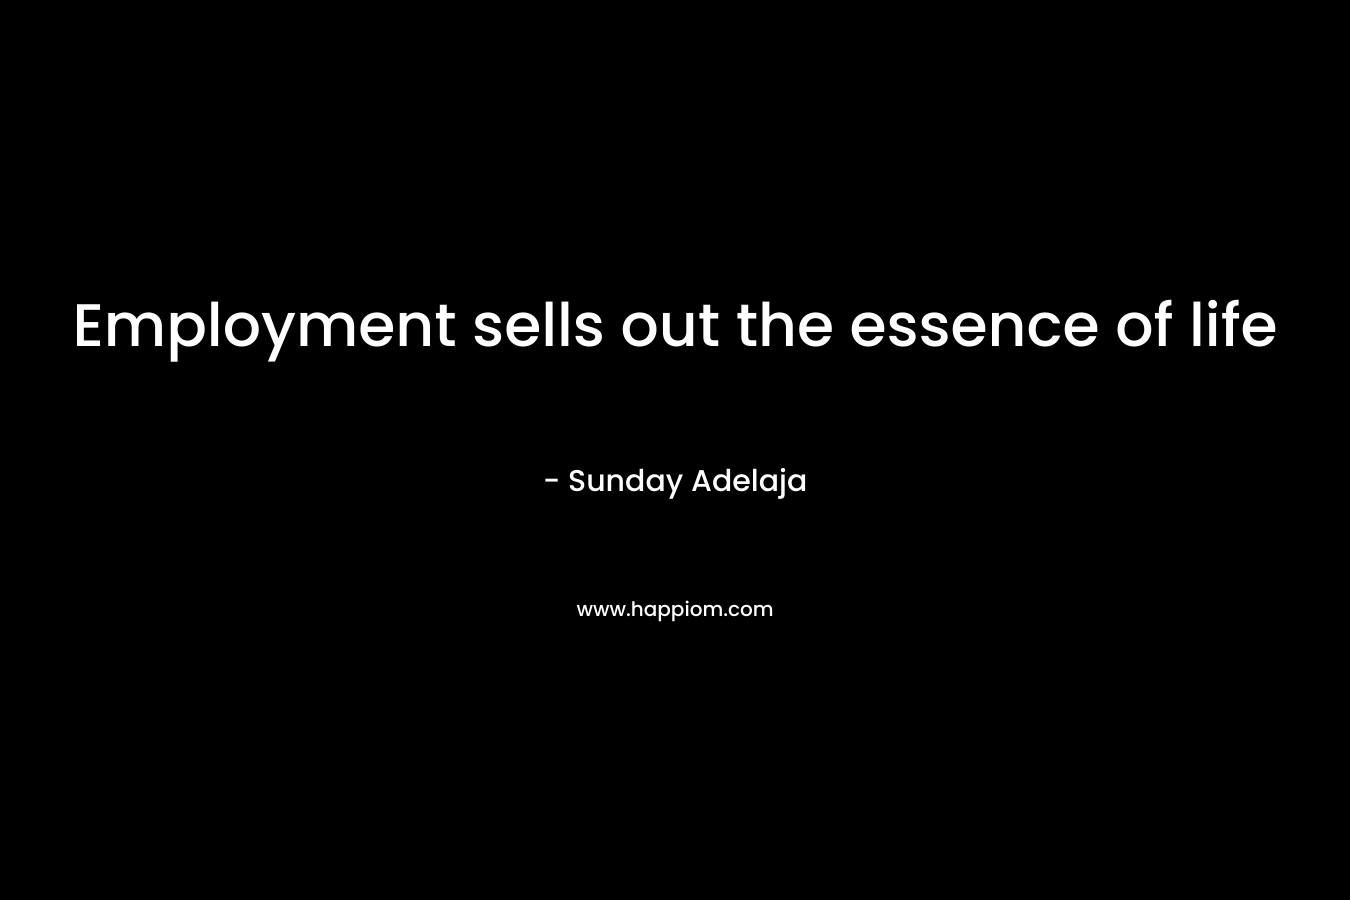 Employment sells out the essence of life